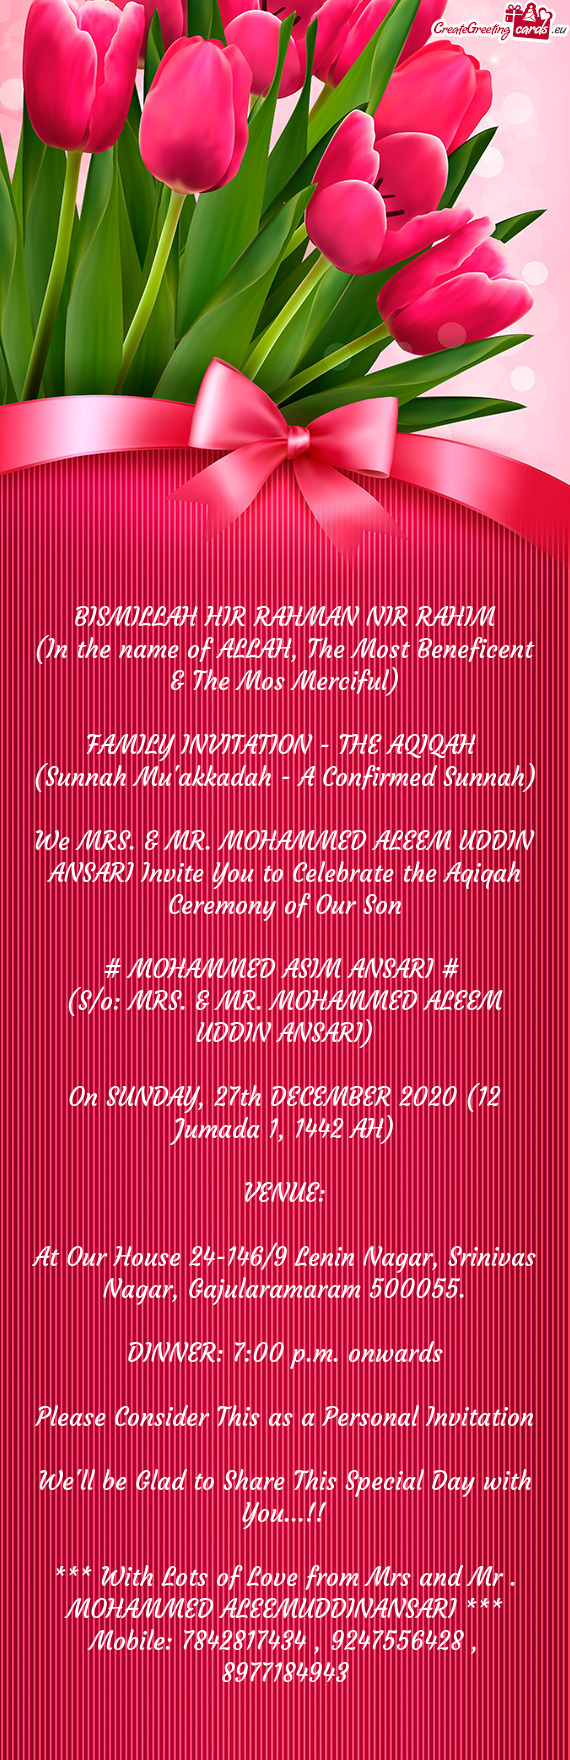 We MRS. & MR. MOHAMMED ALEEM UDDIN ANSARI Invite You to Celebrate the Aqiqah Ceremony of Our Son